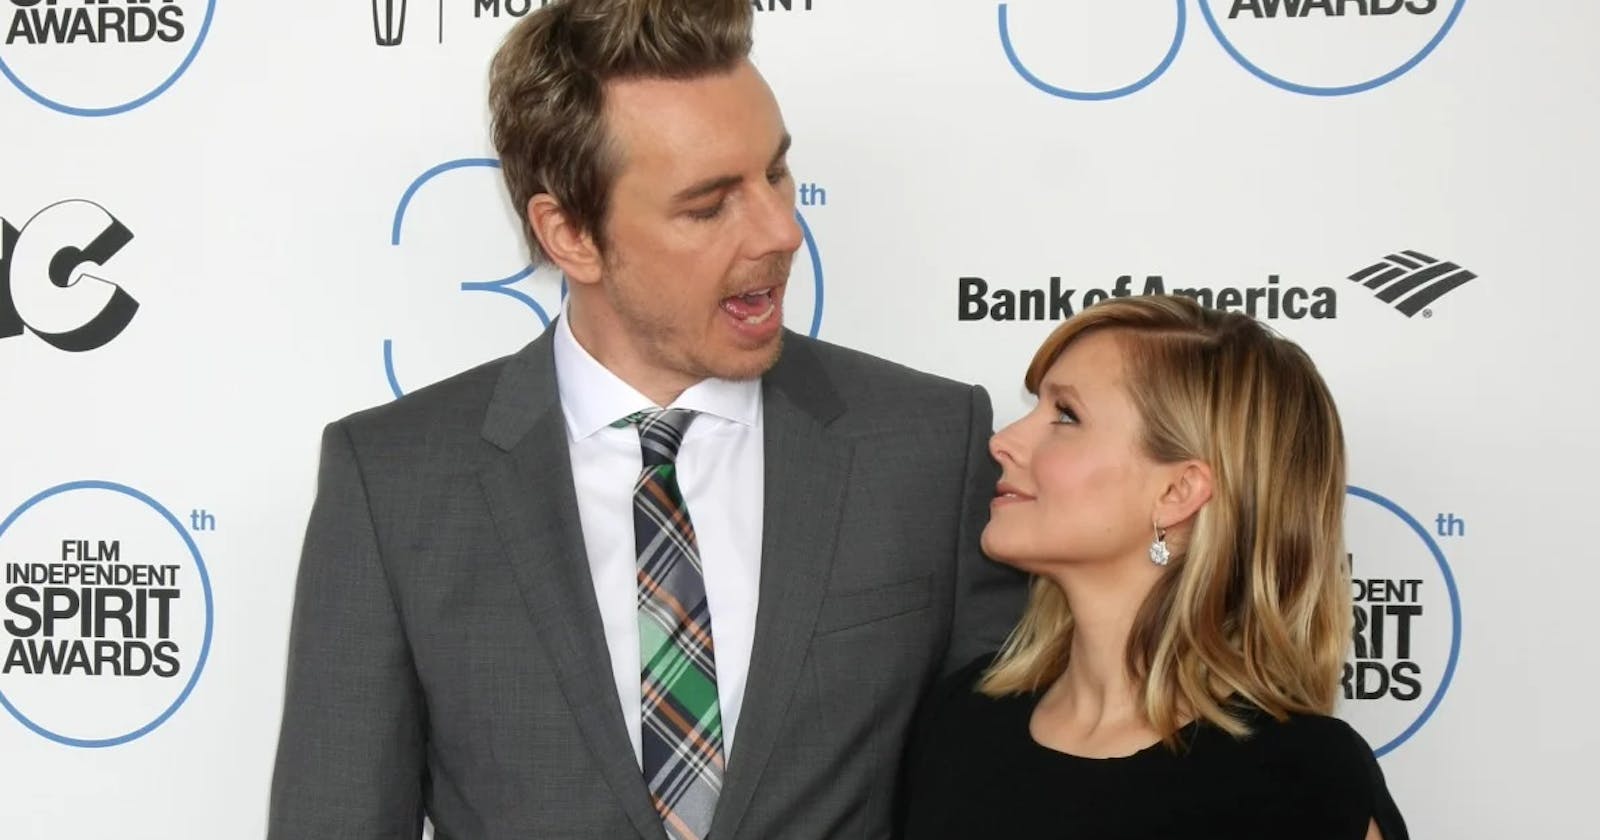 Kristen Bell shares her wedding moments with Dax Shepard